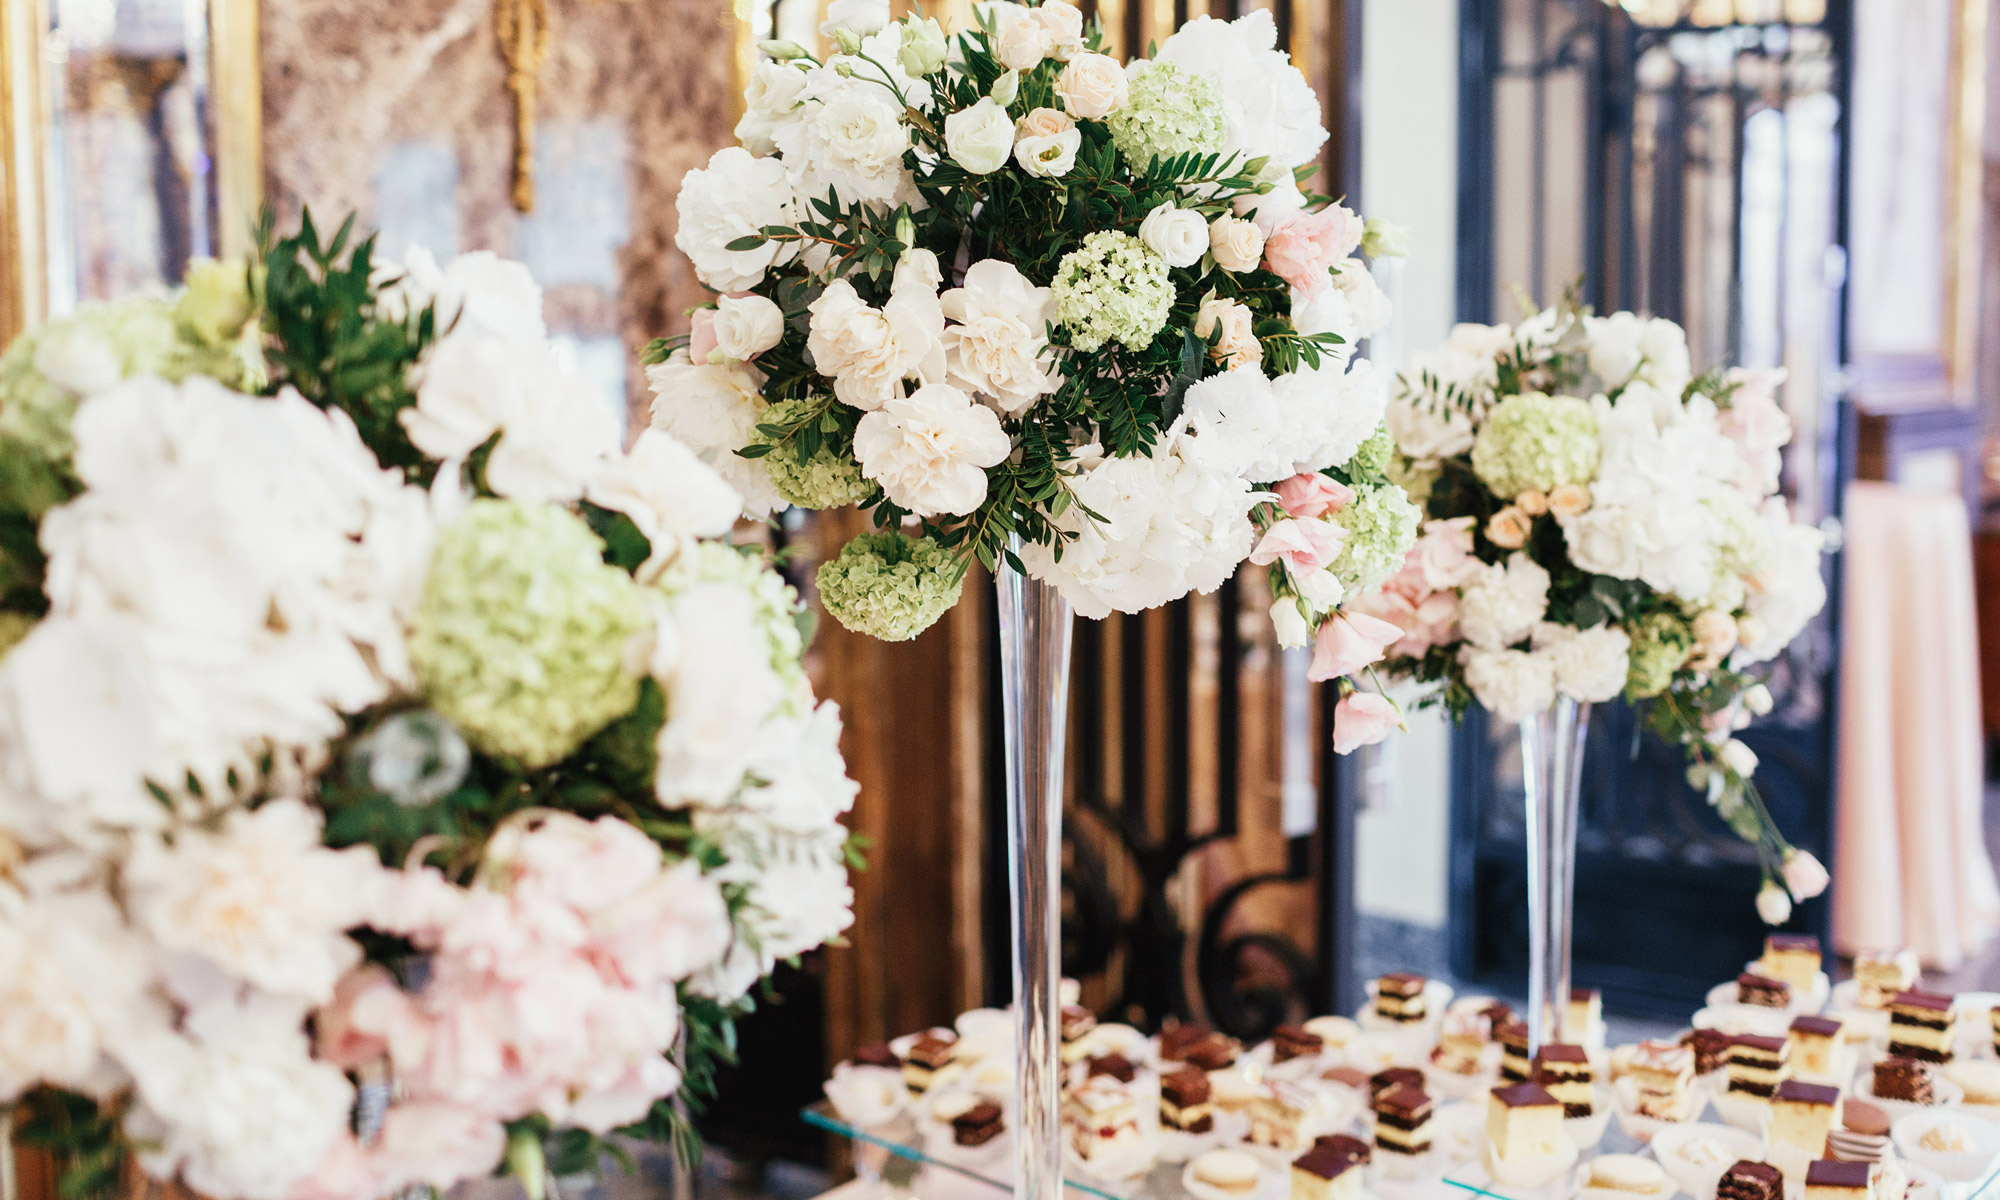 Upgrade Your Wedding Reception Food Table with these Tips